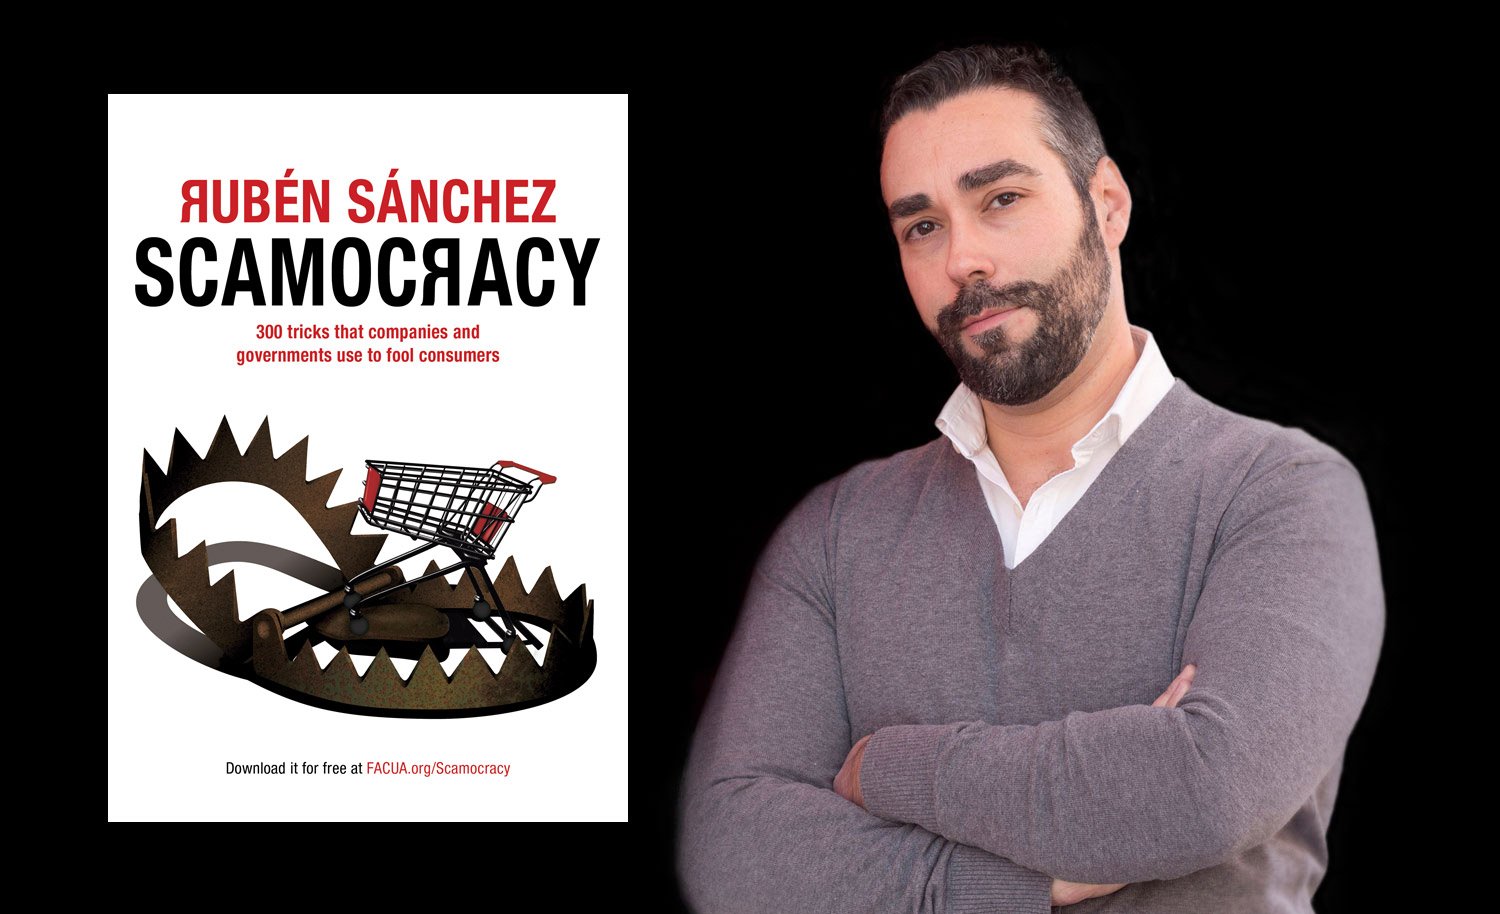 Scamocracy (Timocracia, in Spanish), Rubén Sánchez's new book, will be published in October, 21